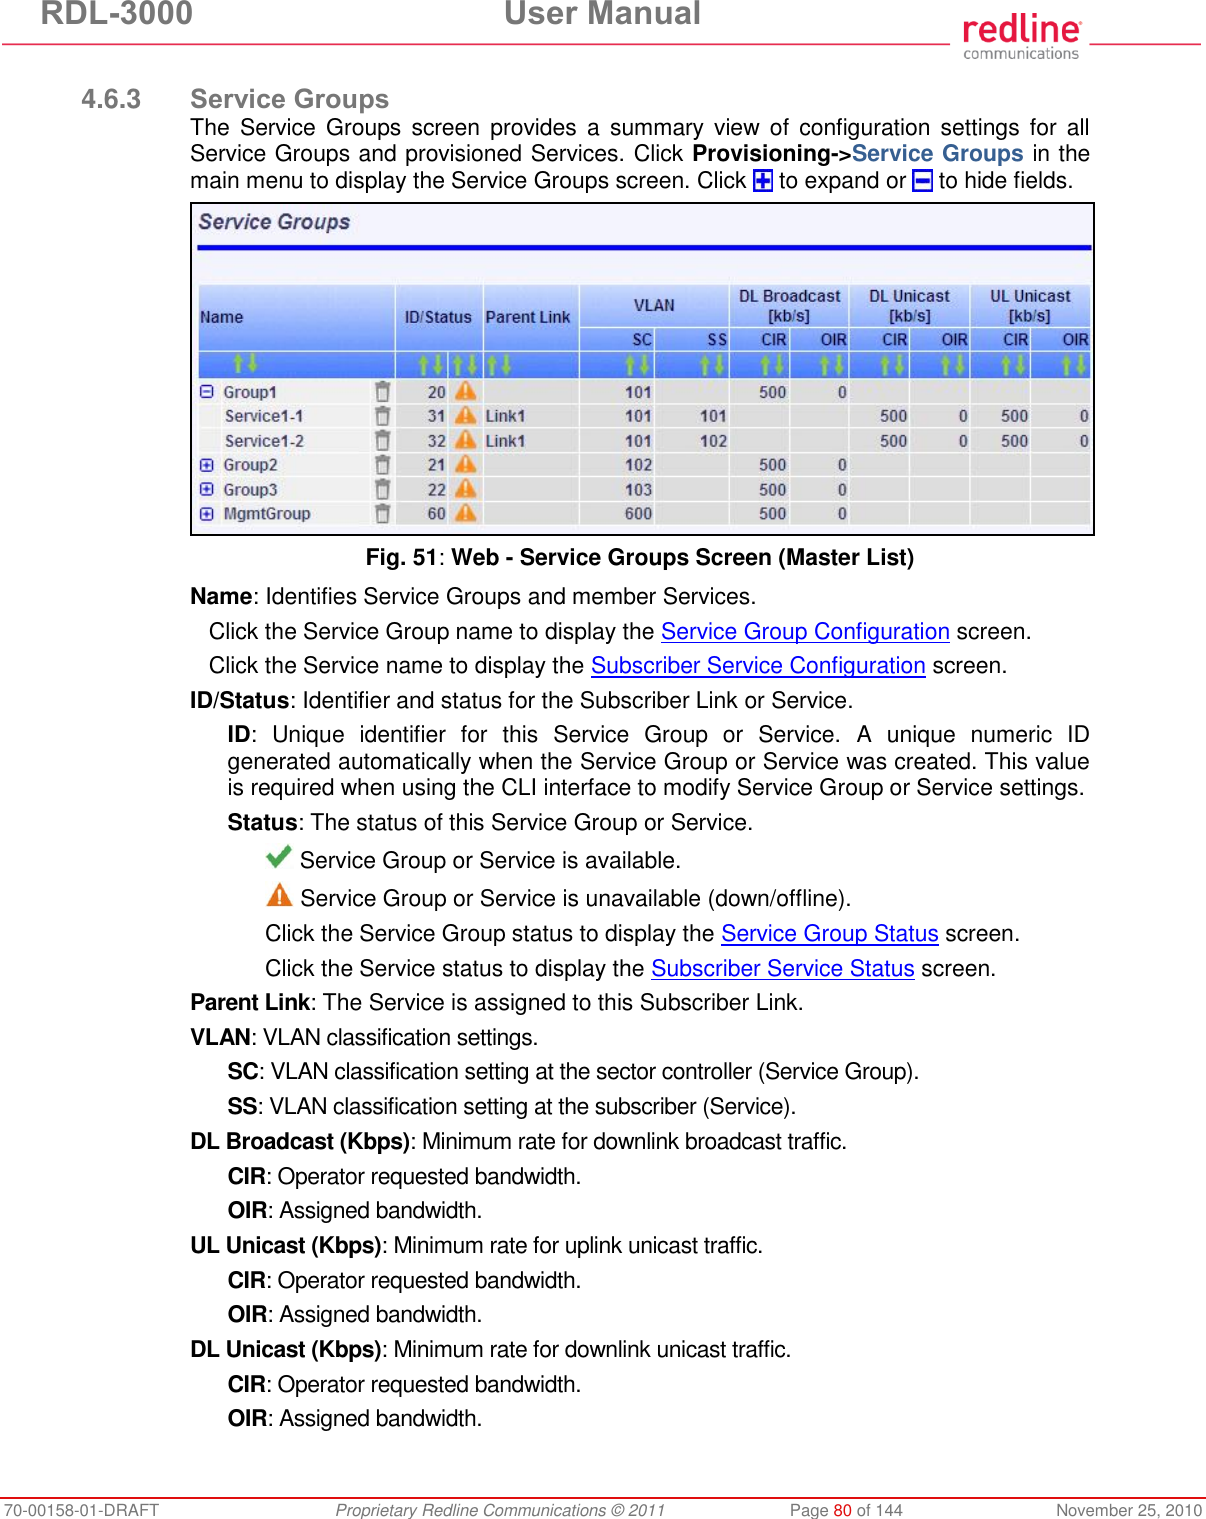 RDL-3000  User Manual 70-00158-01-DRAFT  Proprietary Redline Communications © 2011  Page 80 of 144  November 25, 2010  4.6.3 Service Groups The  Service  Groups  screen  provides  a  summary  view  of  configuration settings  for  all Service Groups and provisioned Services. Click Provisioning-&gt;Service Groups in the main menu to display the Service Groups screen. Click   to expand or   to hide fields.  Fig. 51: Web - Service Groups Screen (Master List) Name: Identifies Service Groups and member Services. Click the Service Group name to display the Service Group Configuration screen. Click the Service name to display the Subscriber Service Configuration screen. ID/Status: Identifier and status for the Subscriber Link or Service. ID:  Unique  identifier  for  this  Service  Group  or  Service.  A  unique  numeric  ID generated automatically when the Service Group or Service was created. This value is required when using the CLI interface to modify Service Group or Service settings. Status: The status of this Service Group or Service.  Service Group or Service is available.  Service Group or Service is unavailable (down/offline). Click the Service Group status to display the Service Group Status screen. Click the Service status to display the Subscriber Service Status screen. Parent Link: The Service is assigned to this Subscriber Link. VLAN: VLAN classification settings. SC: VLAN classification setting at the sector controller (Service Group). SS: VLAN classification setting at the subscriber (Service). DL Broadcast (Kbps): Minimum rate for downlink broadcast traffic.  CIR: Operator requested bandwidth. OIR: Assigned bandwidth. UL Unicast (Kbps): Minimum rate for uplink unicast traffic. CIR: Operator requested bandwidth. OIR: Assigned bandwidth. DL Unicast (Kbps): Minimum rate for downlink unicast traffic. CIR: Operator requested bandwidth. OIR: Assigned bandwidth. 